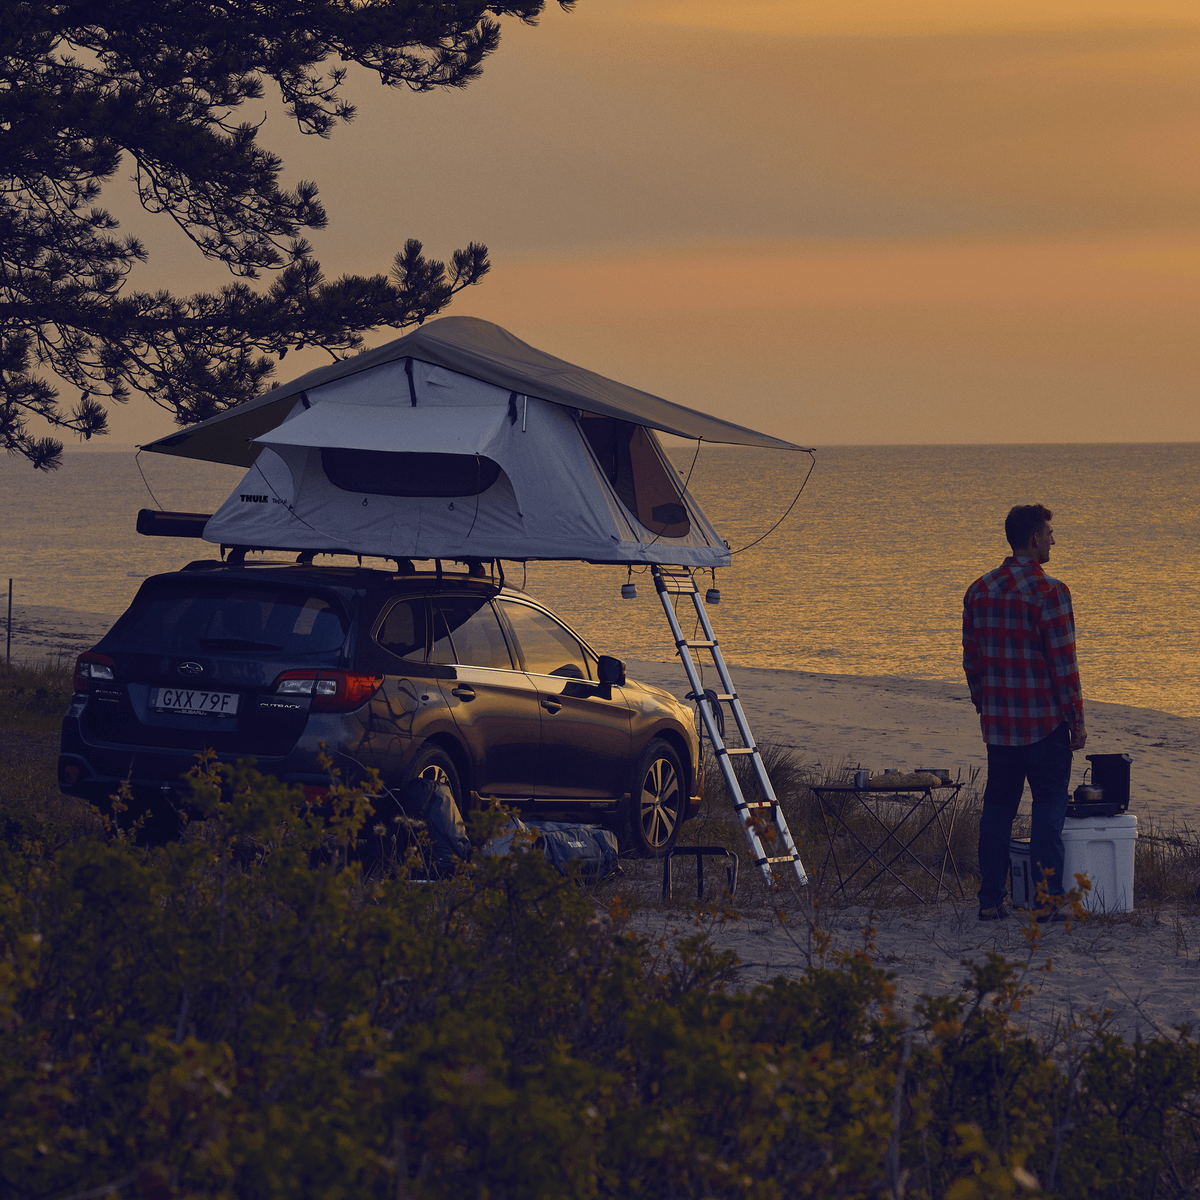 A man is looking at the sunset standing close to a car with a rooftop tent